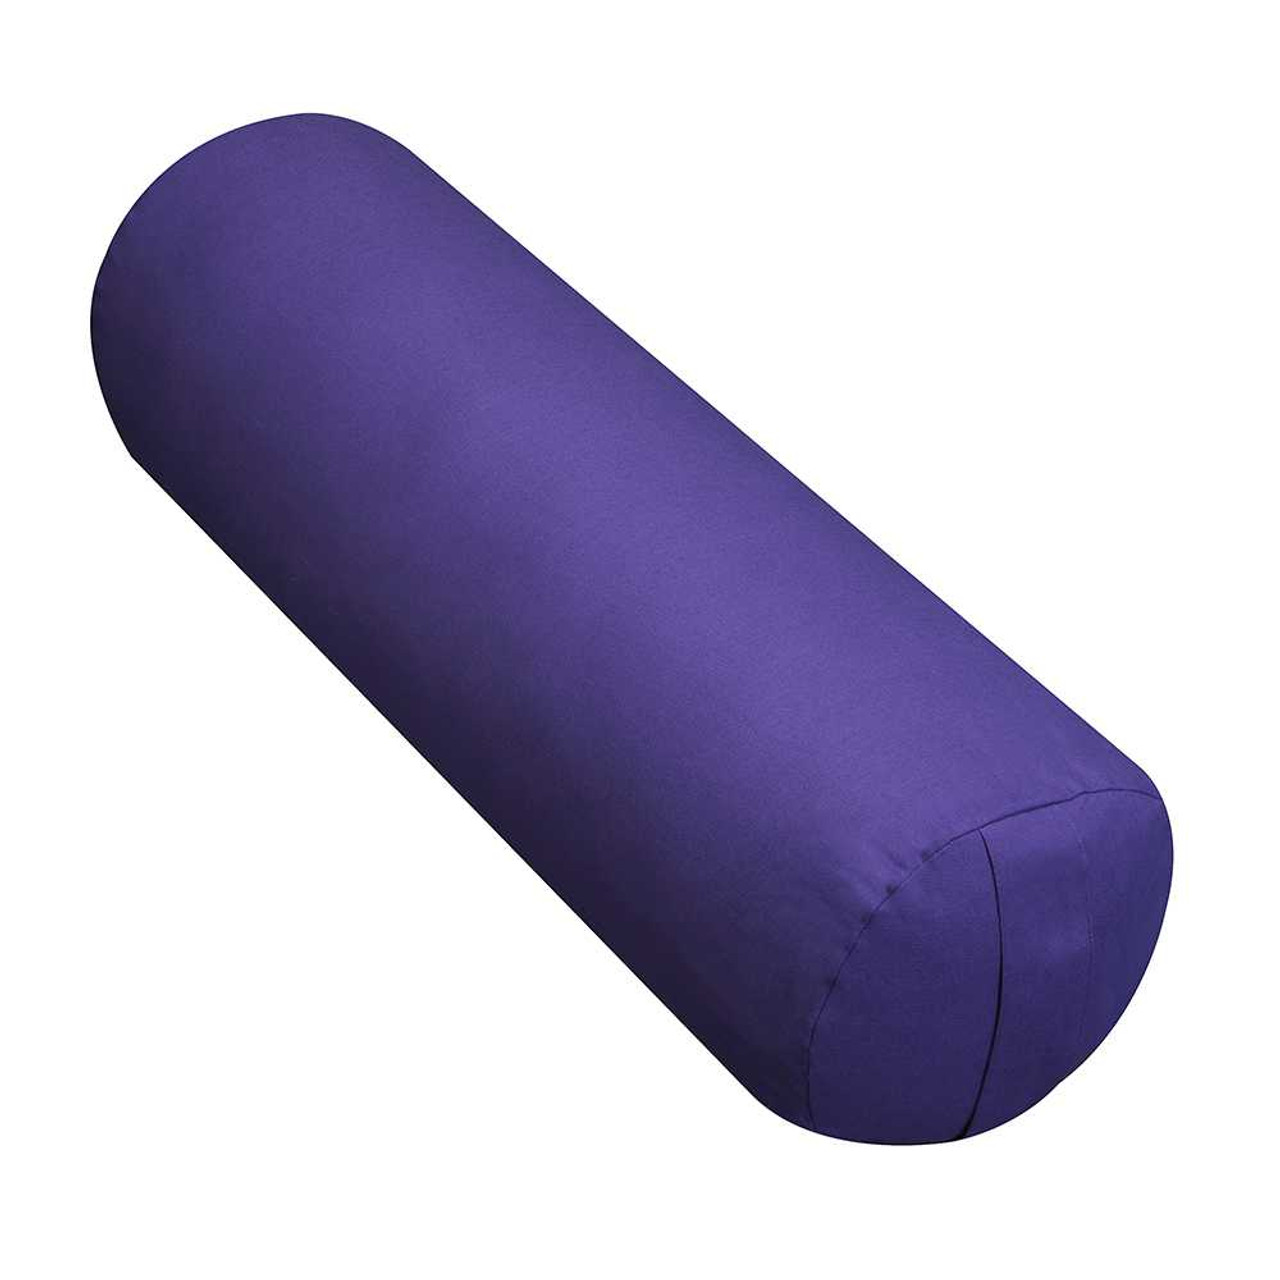 Just Right Large Round Yoga Bolsters (28L x 9W)